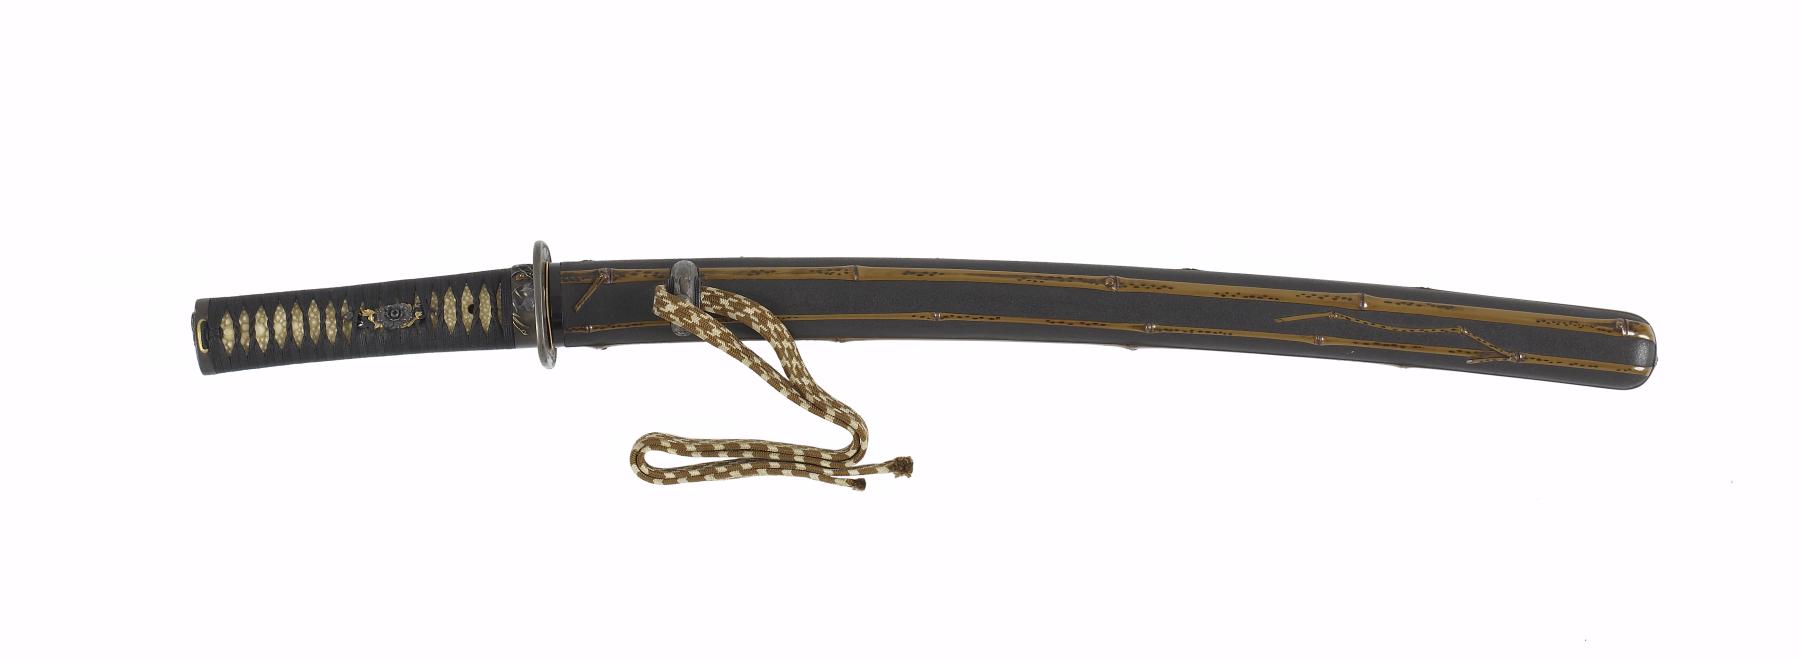 Image for Short sword (wakizashi) with black lacquer saya with strips of bamboo applied (includes 51.1230.1-51.1230.5)